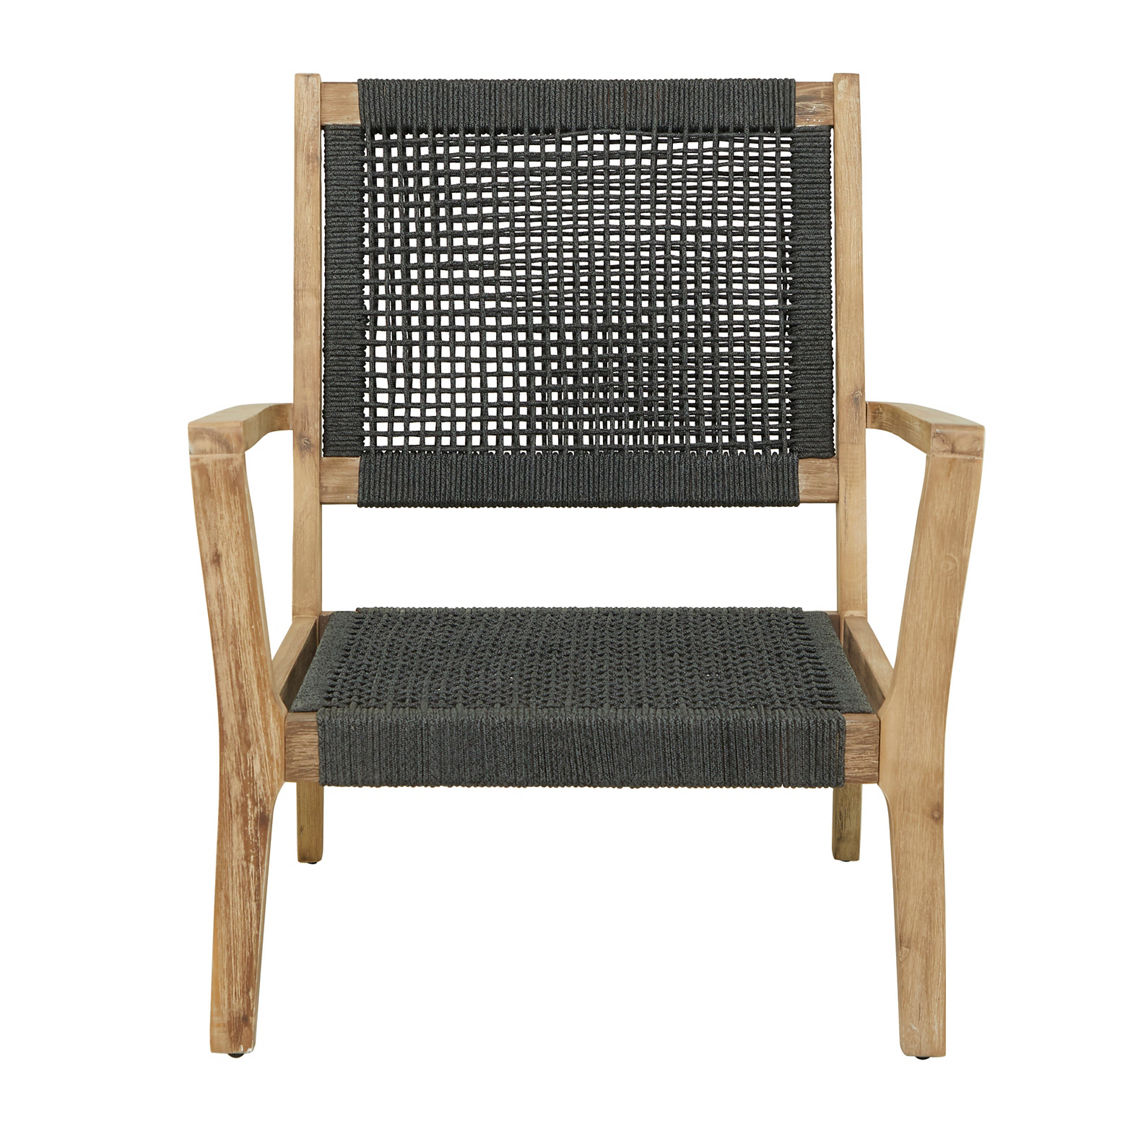 Morgan Hill Home Contemporary Dark Gray Wood Outdoor Chair - Image 4 of 5